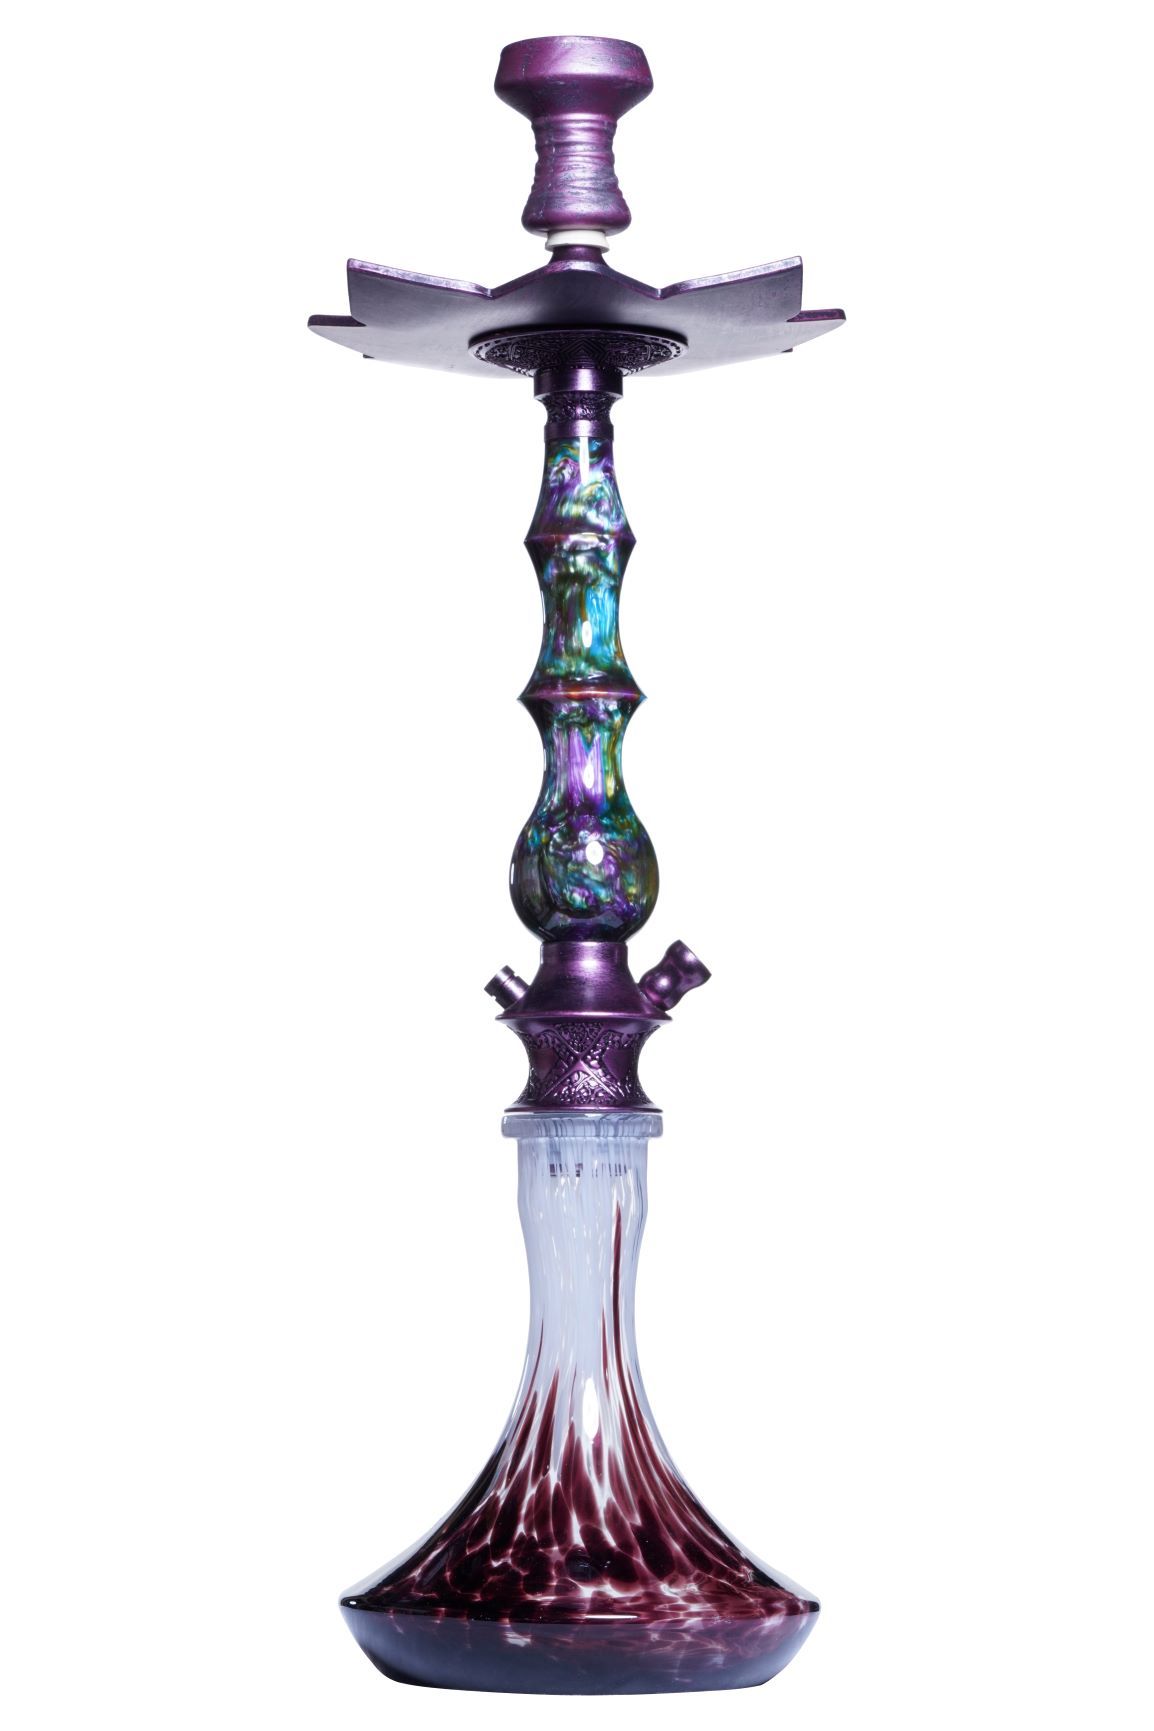 D Hookah Royal Marble purple and green stem with purple and white base